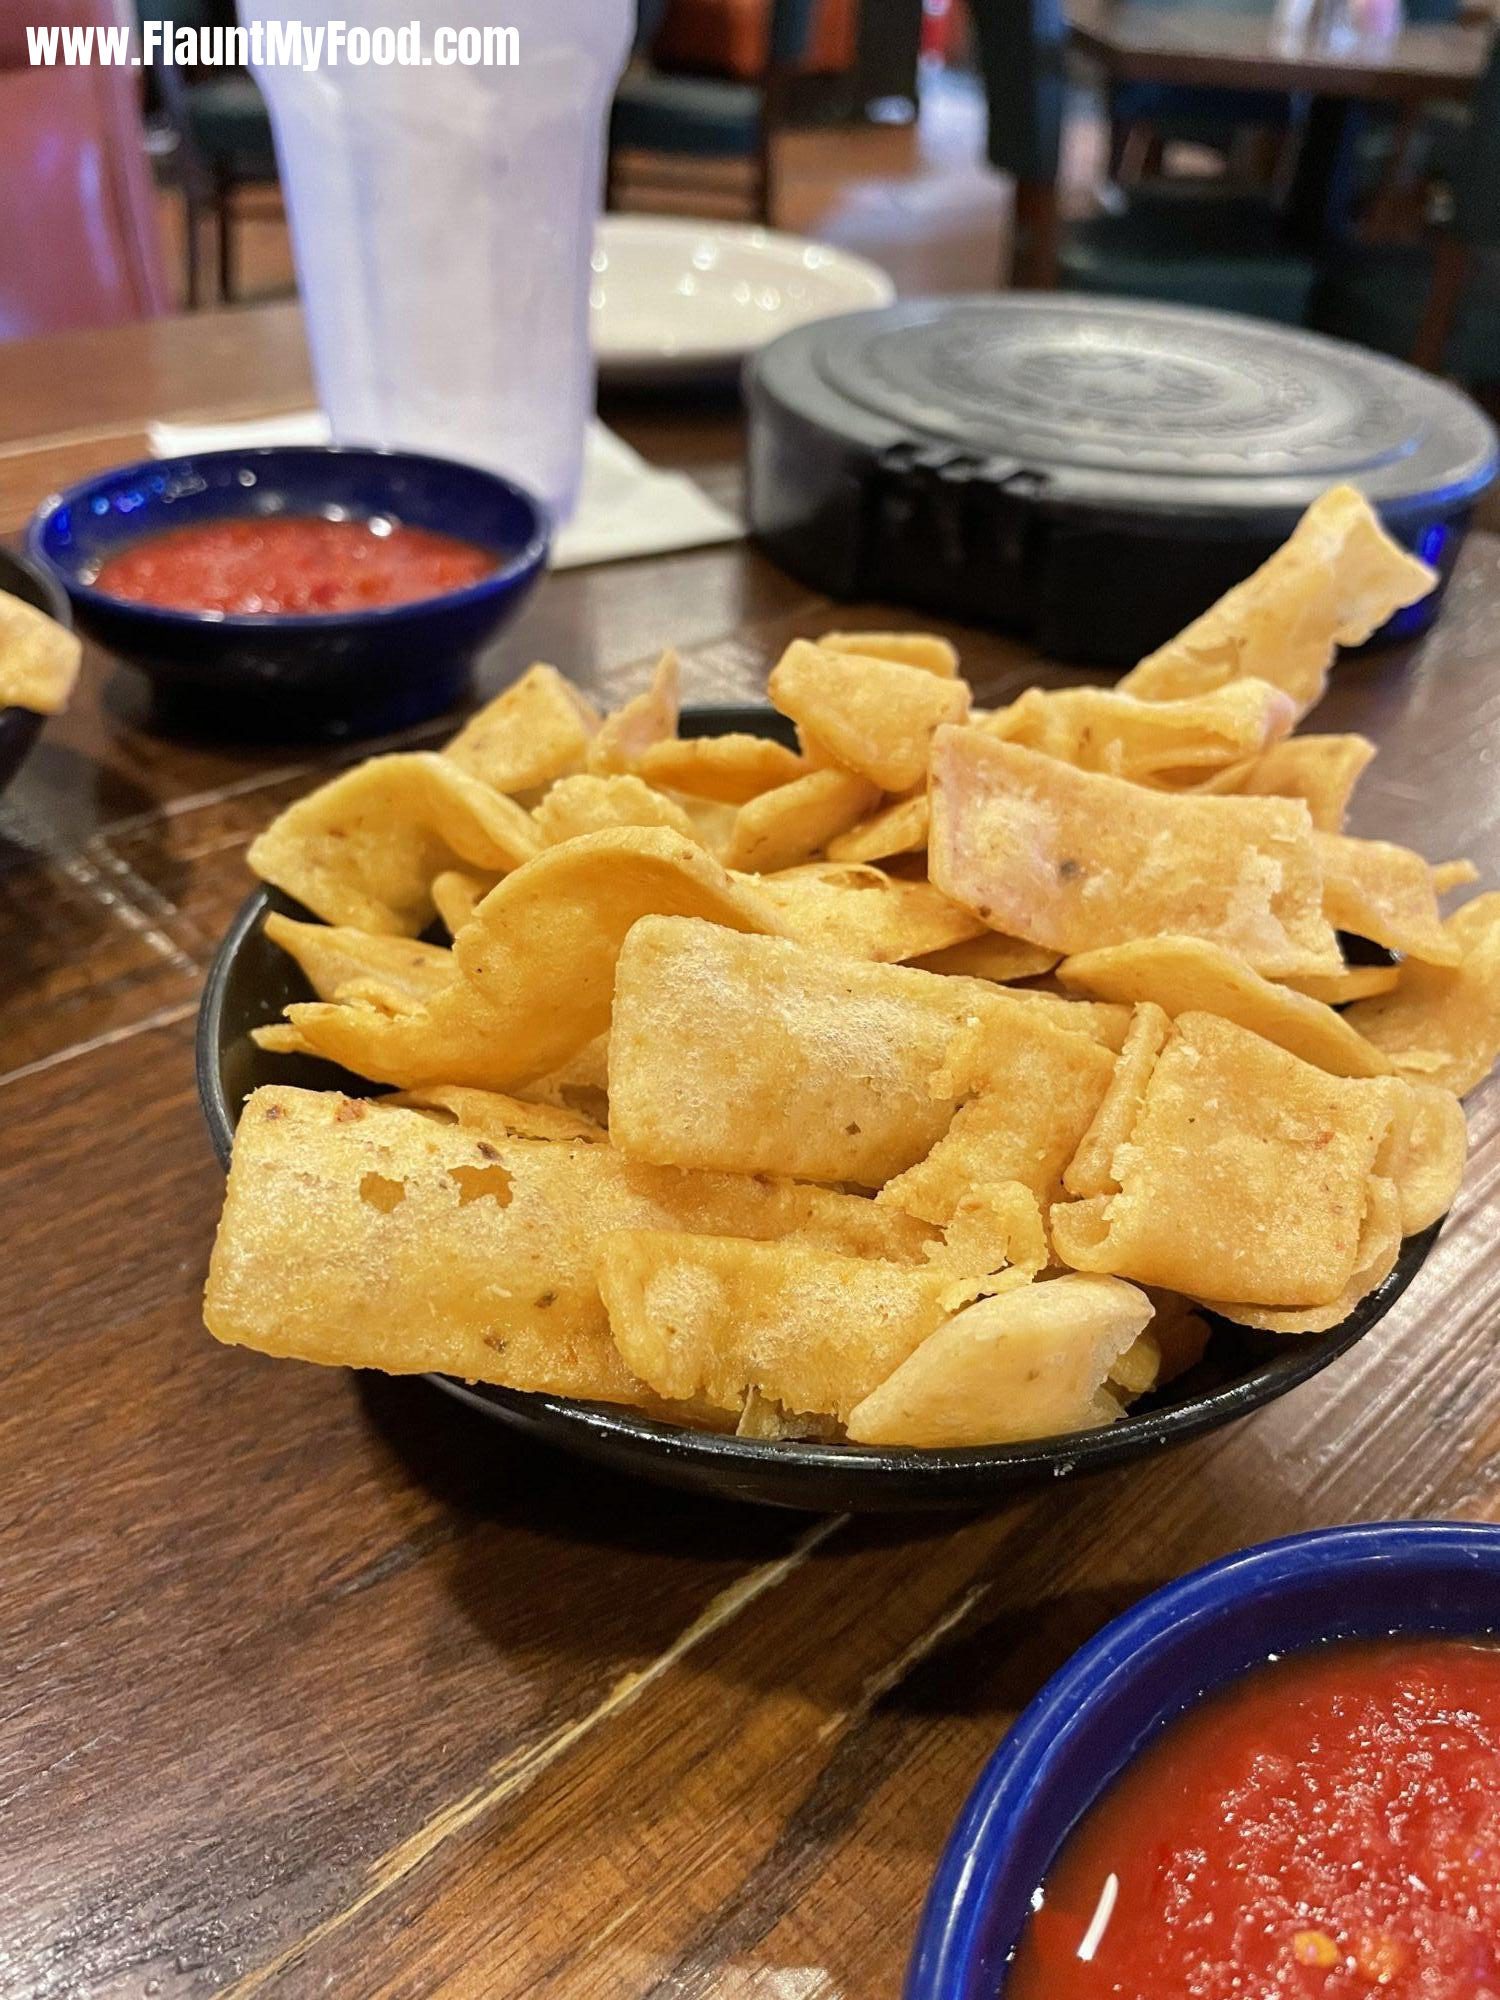 Fresh frito style chips - Mexican Inn